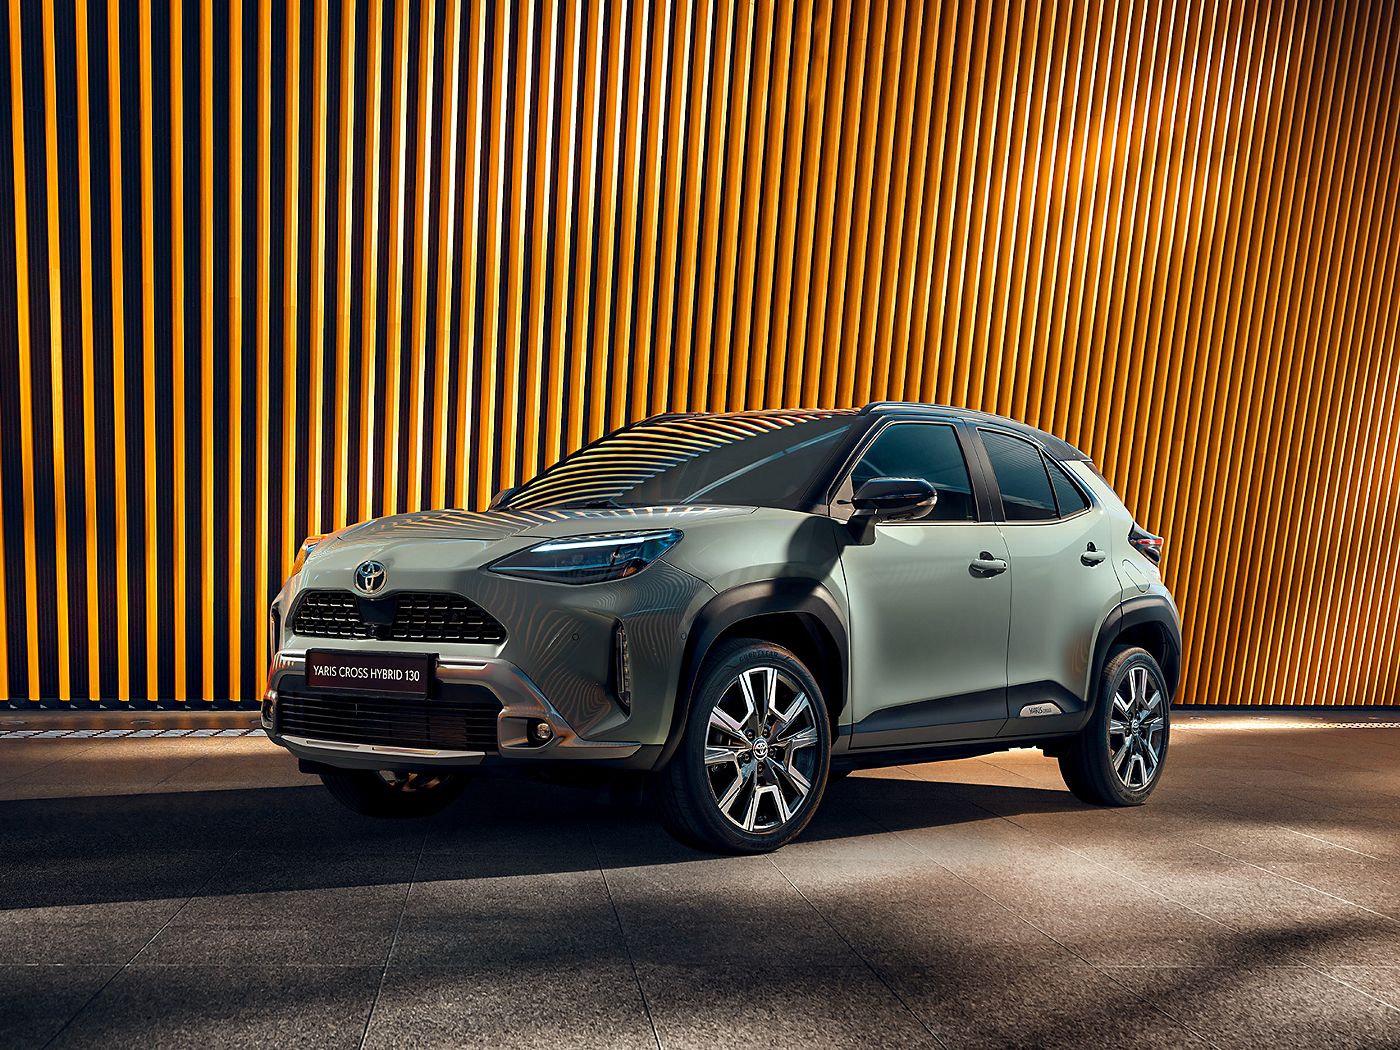 The all-new Toyota Yaris Cross has shown its colours